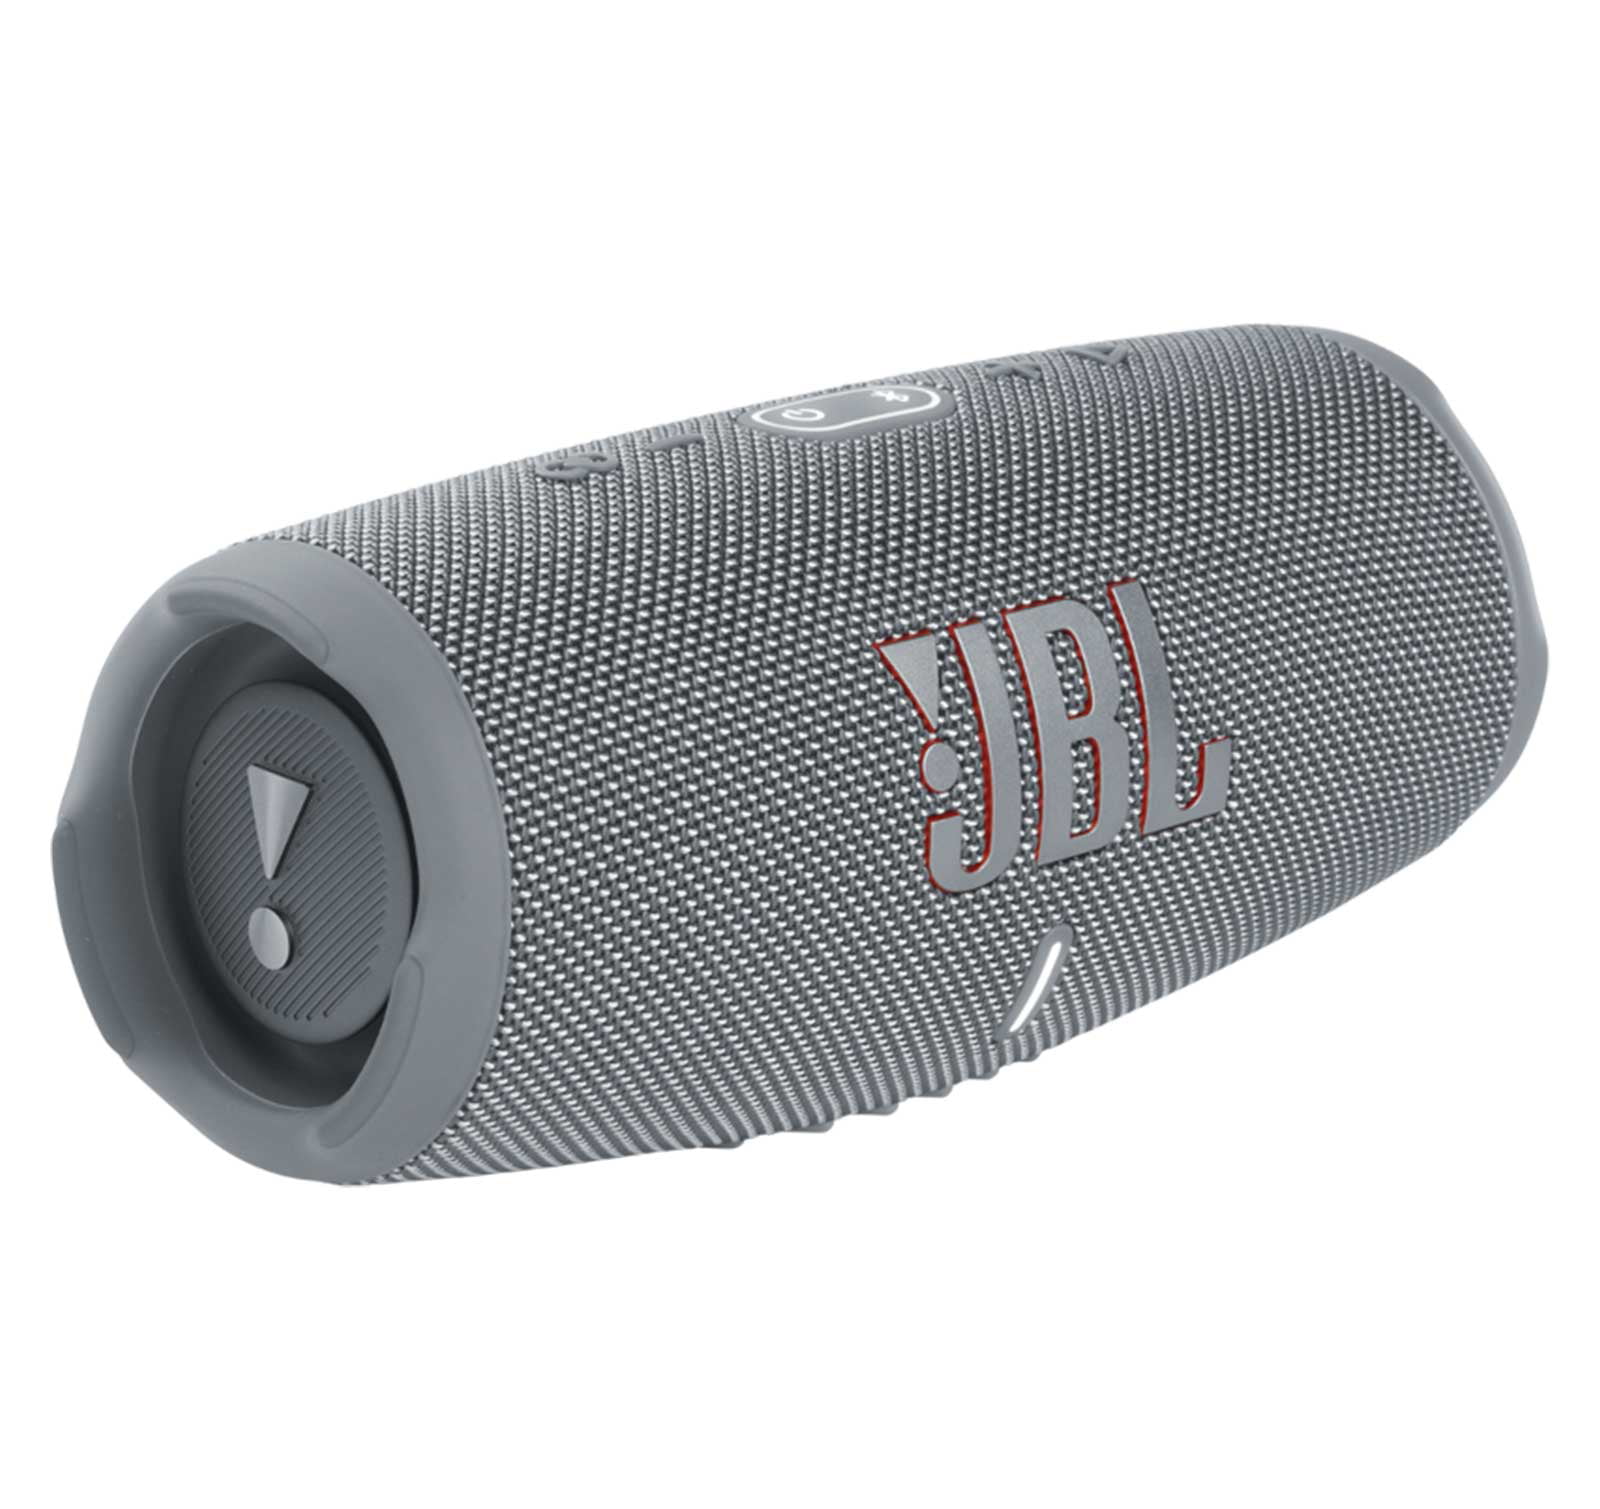 JBL Charge 5 review 